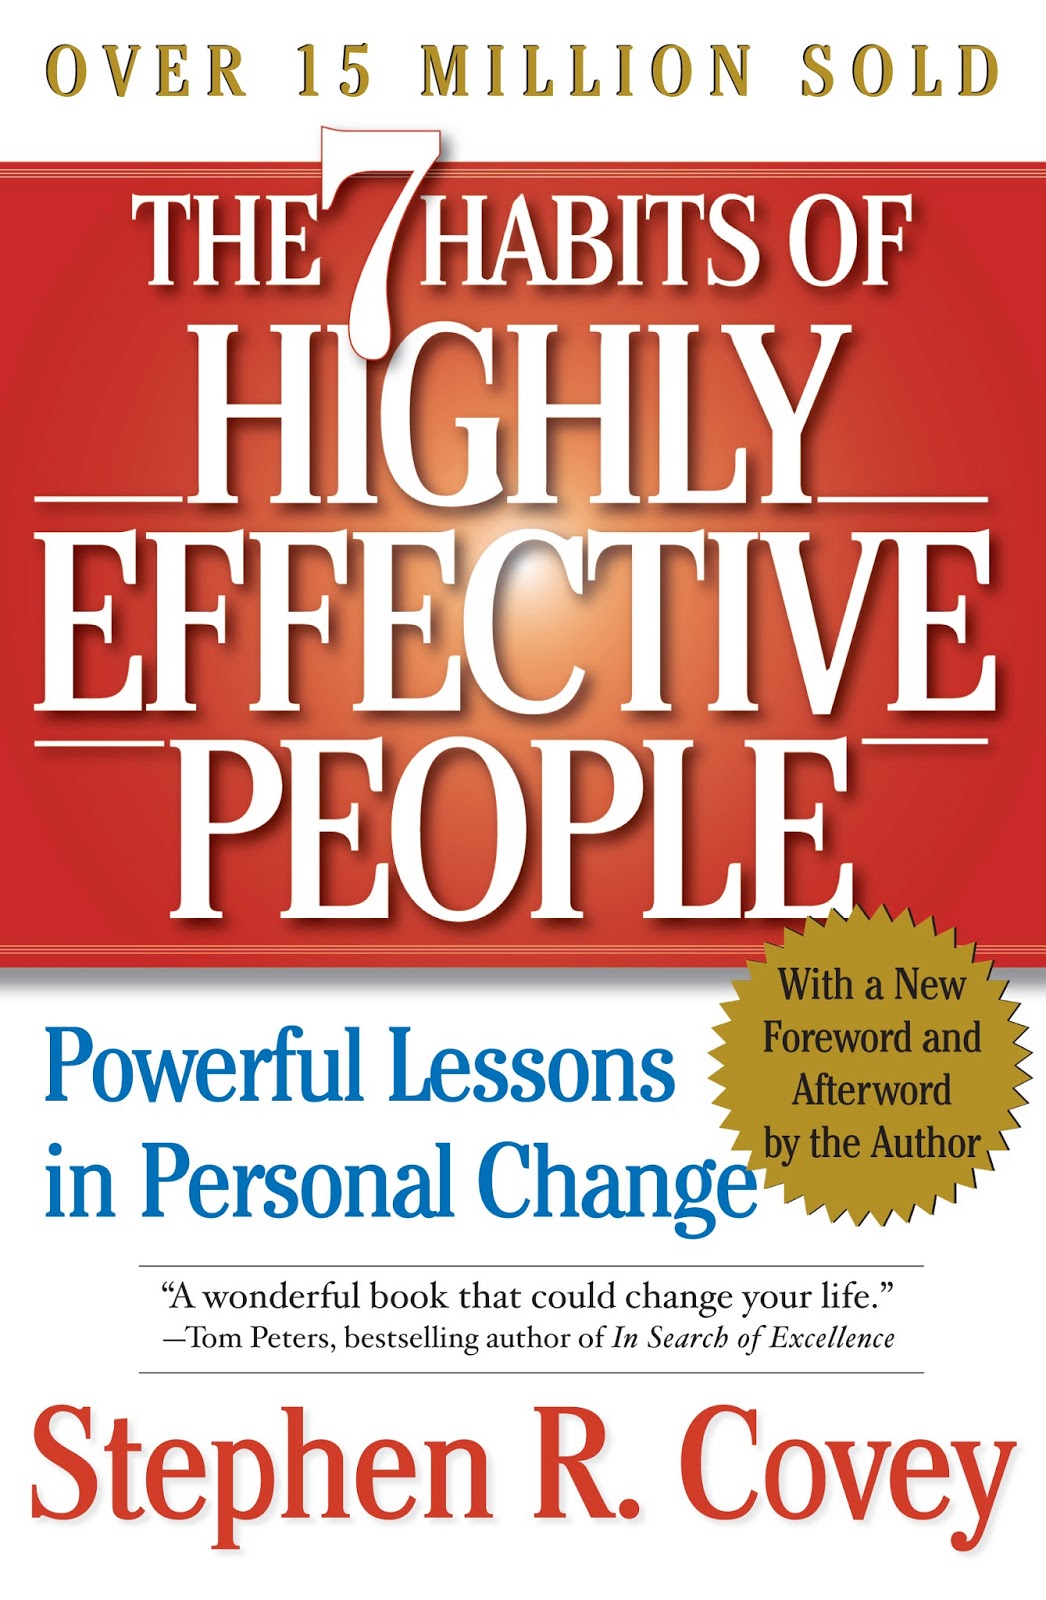 Book Review The 7 Habits Of Highly Effective People By Stephen Covey